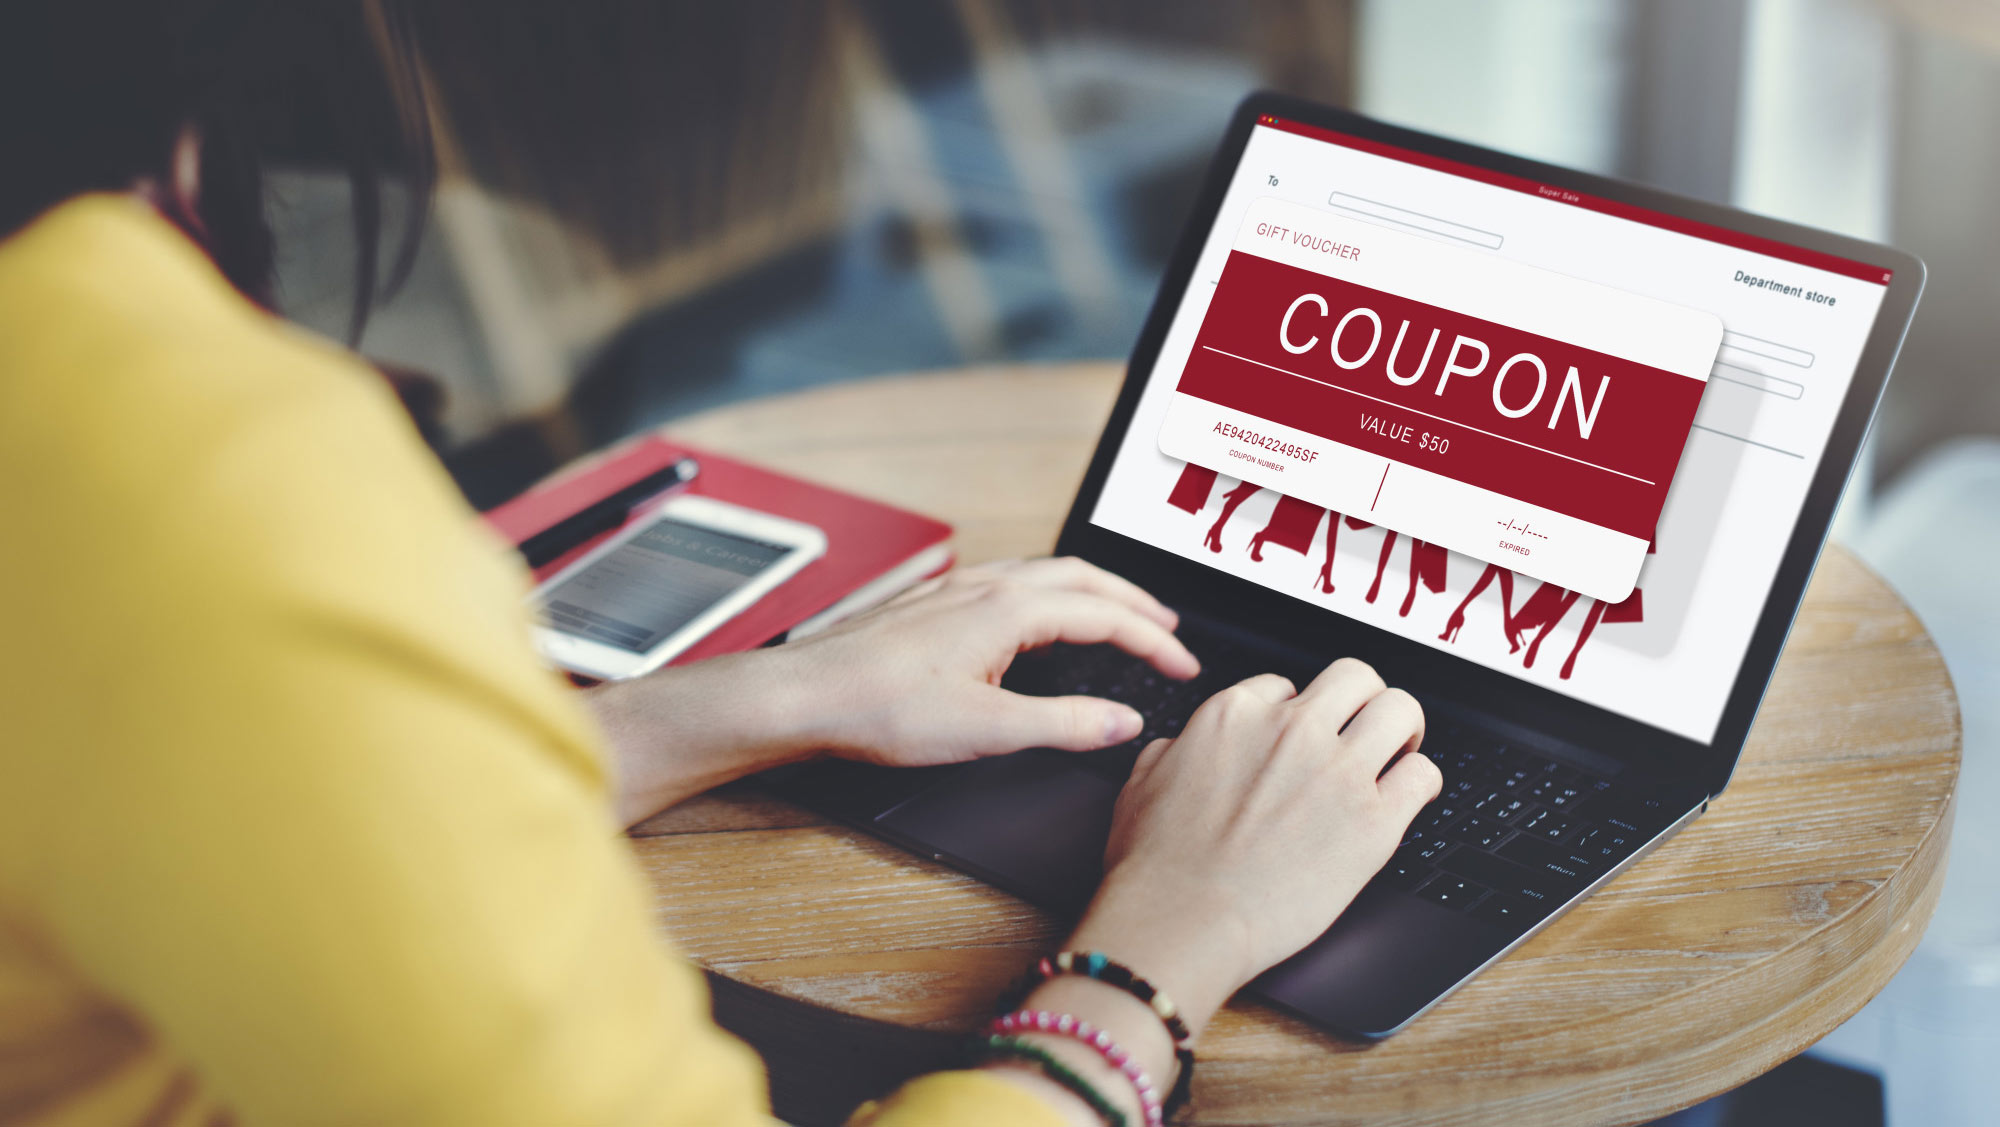 How to Use Coupons: All the Coupon Tips You Need to Know